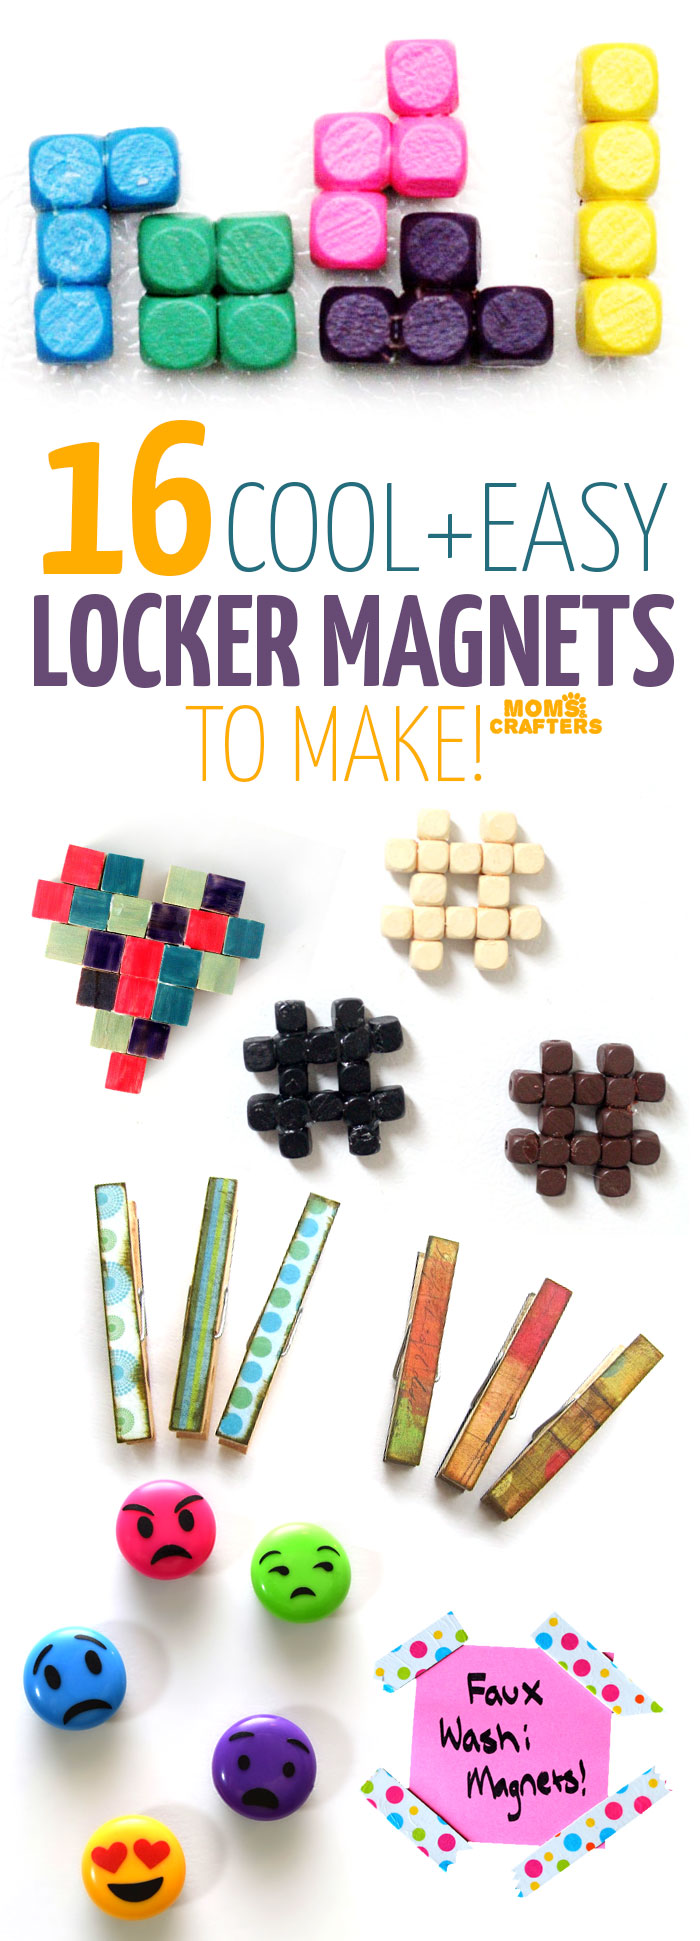 DIY Magnets for lockers and beyond * Moms and Crafters